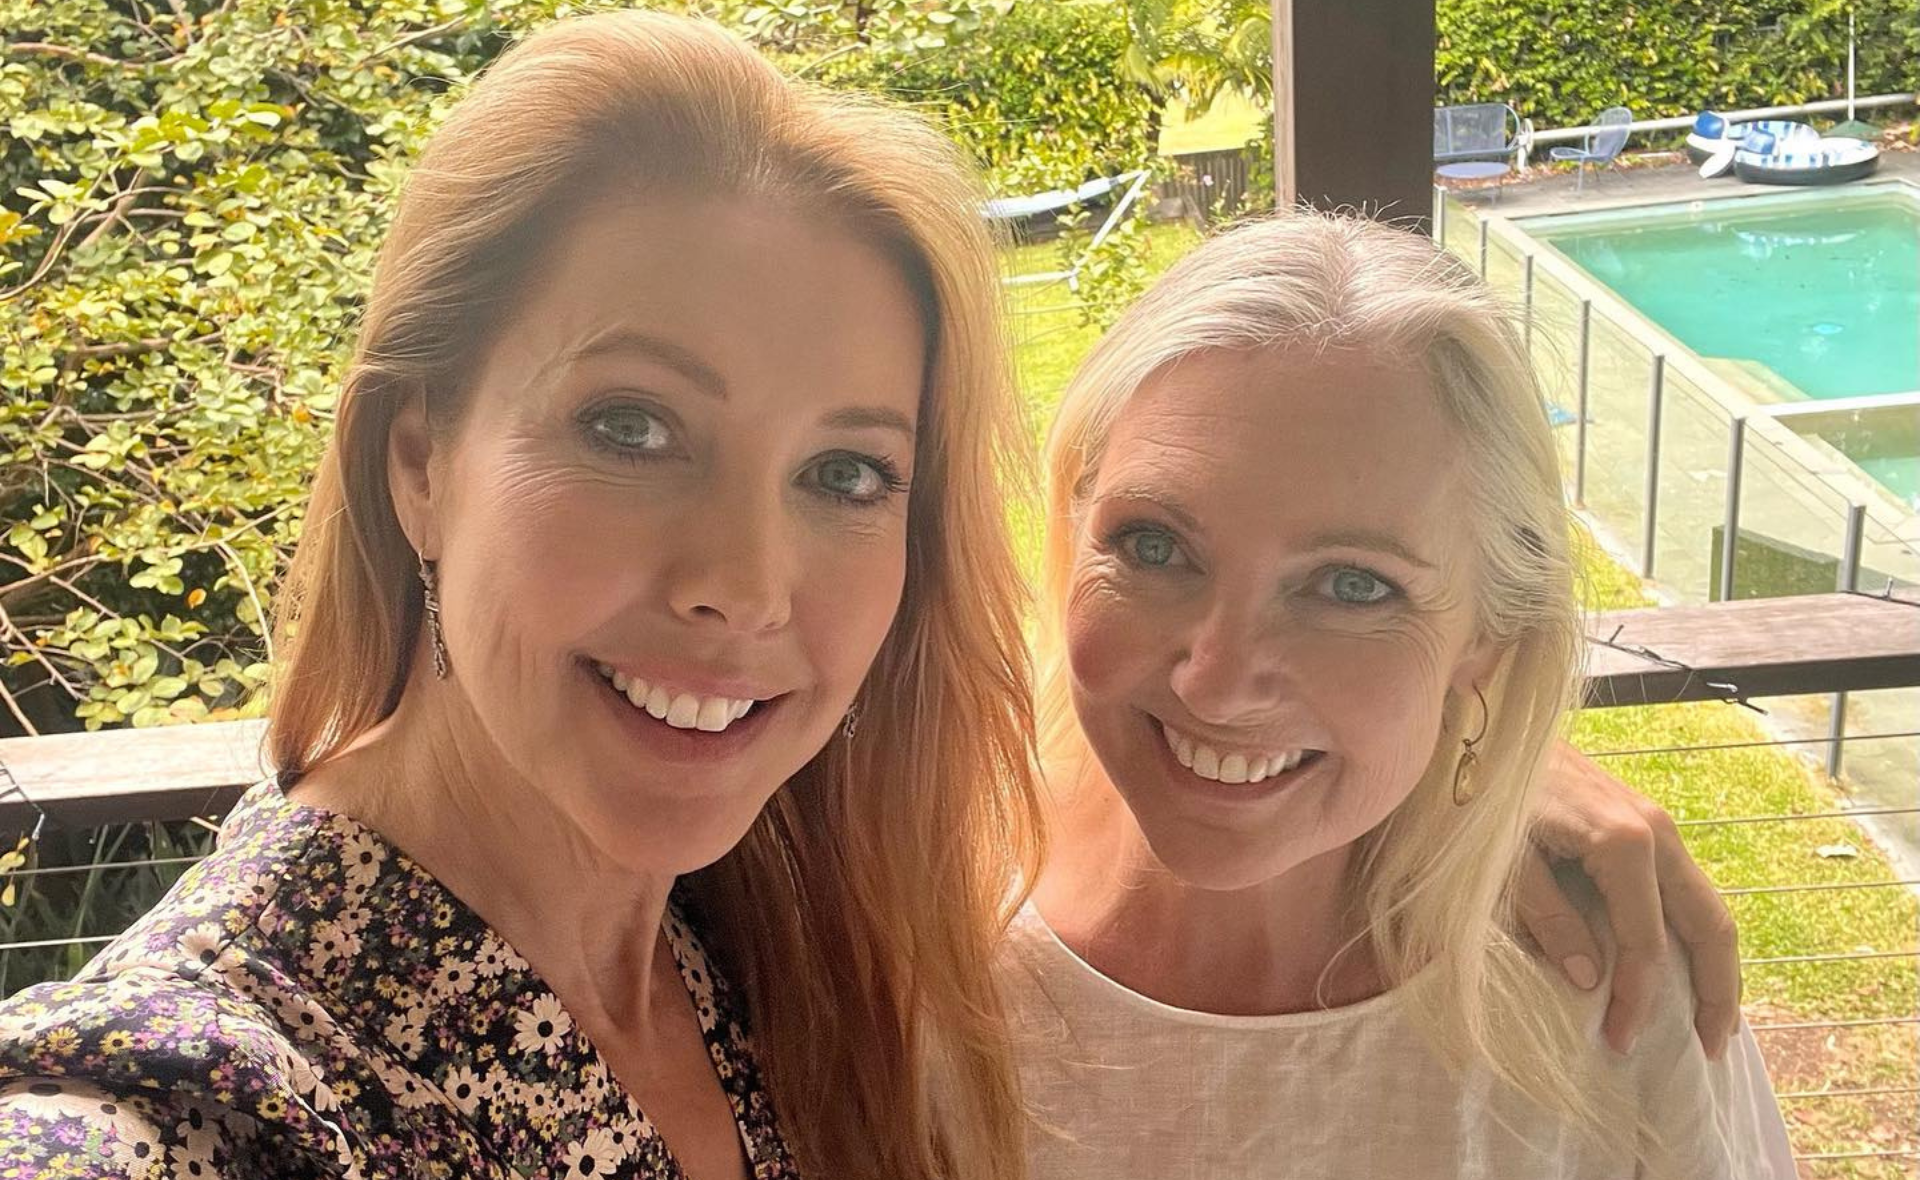 Getaway’s Catriona Rowntree gives an update on her sister Lucinda’s cancer treatment